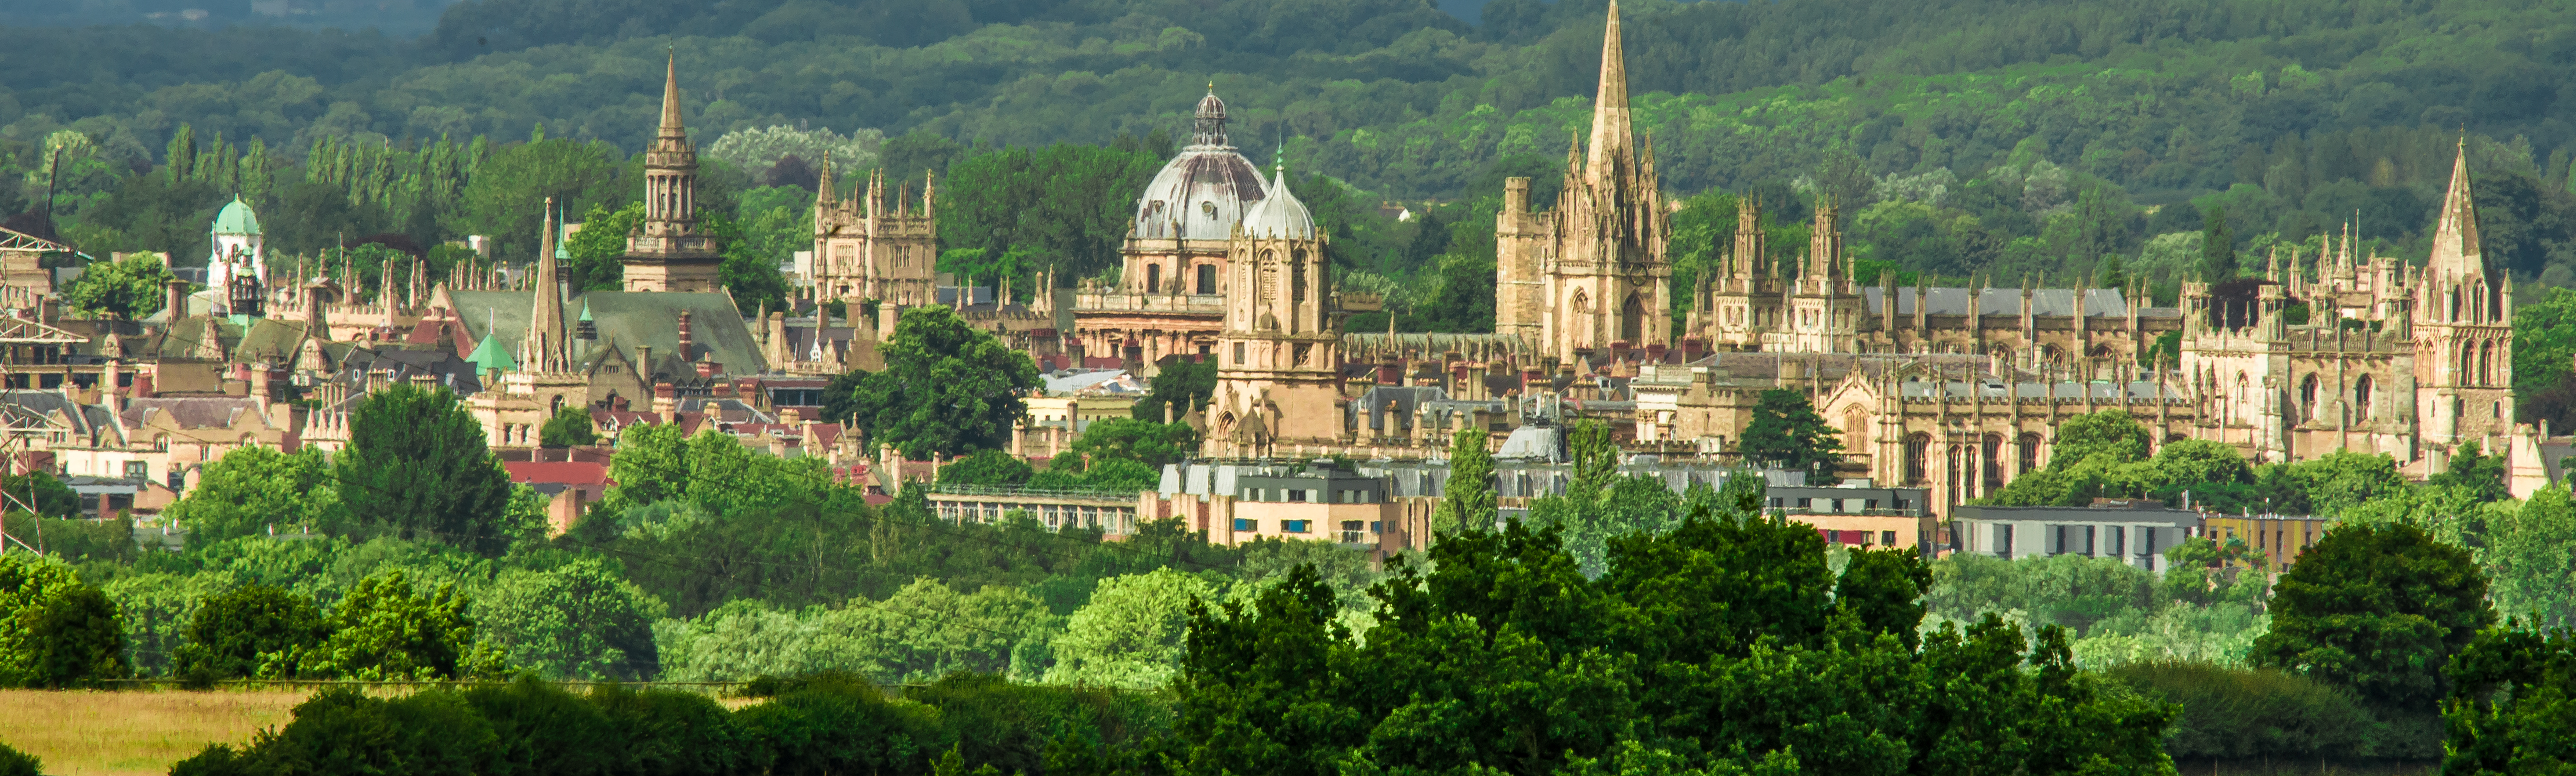 Oxford named world's best for Medicine for seventh consecutive year